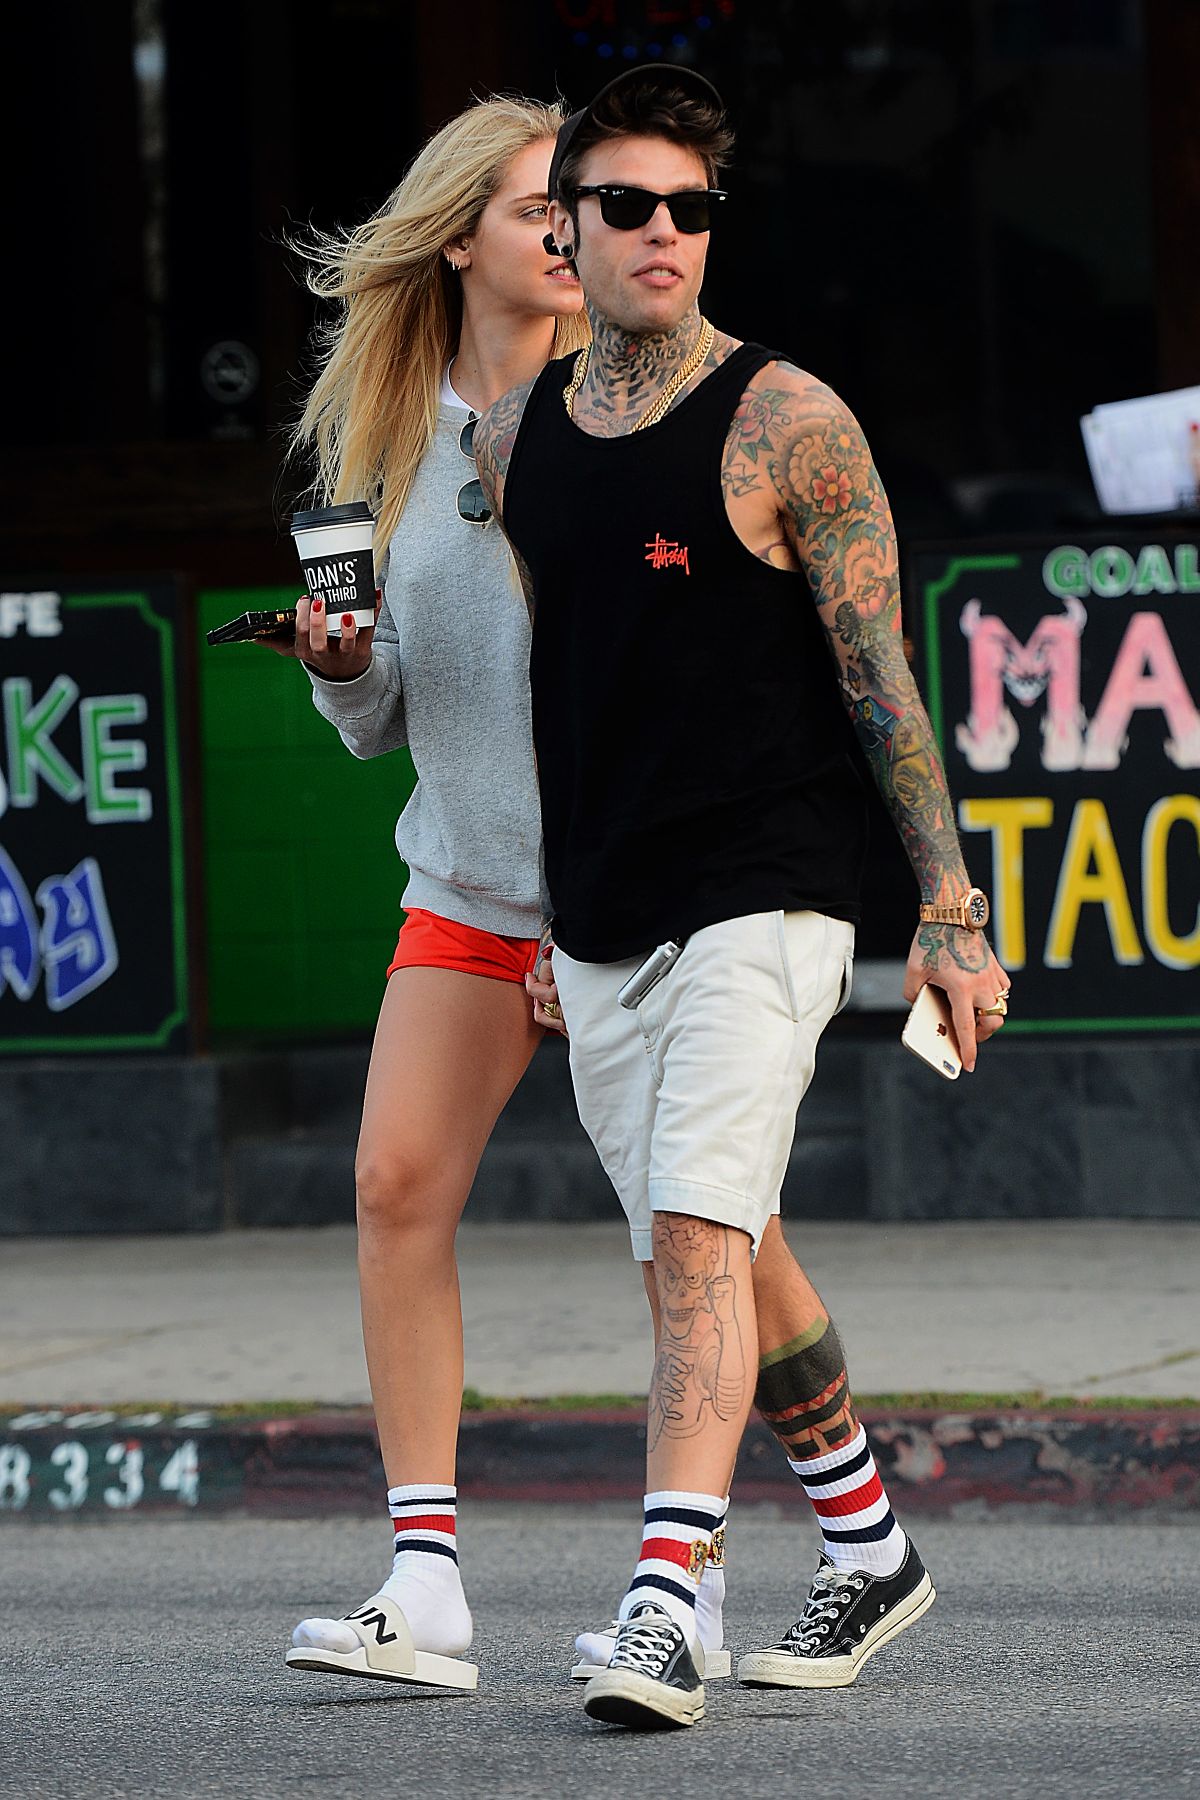 CHIARA FERRAGNI and Fedez Out for Lunch at Joans on Third in Los ...